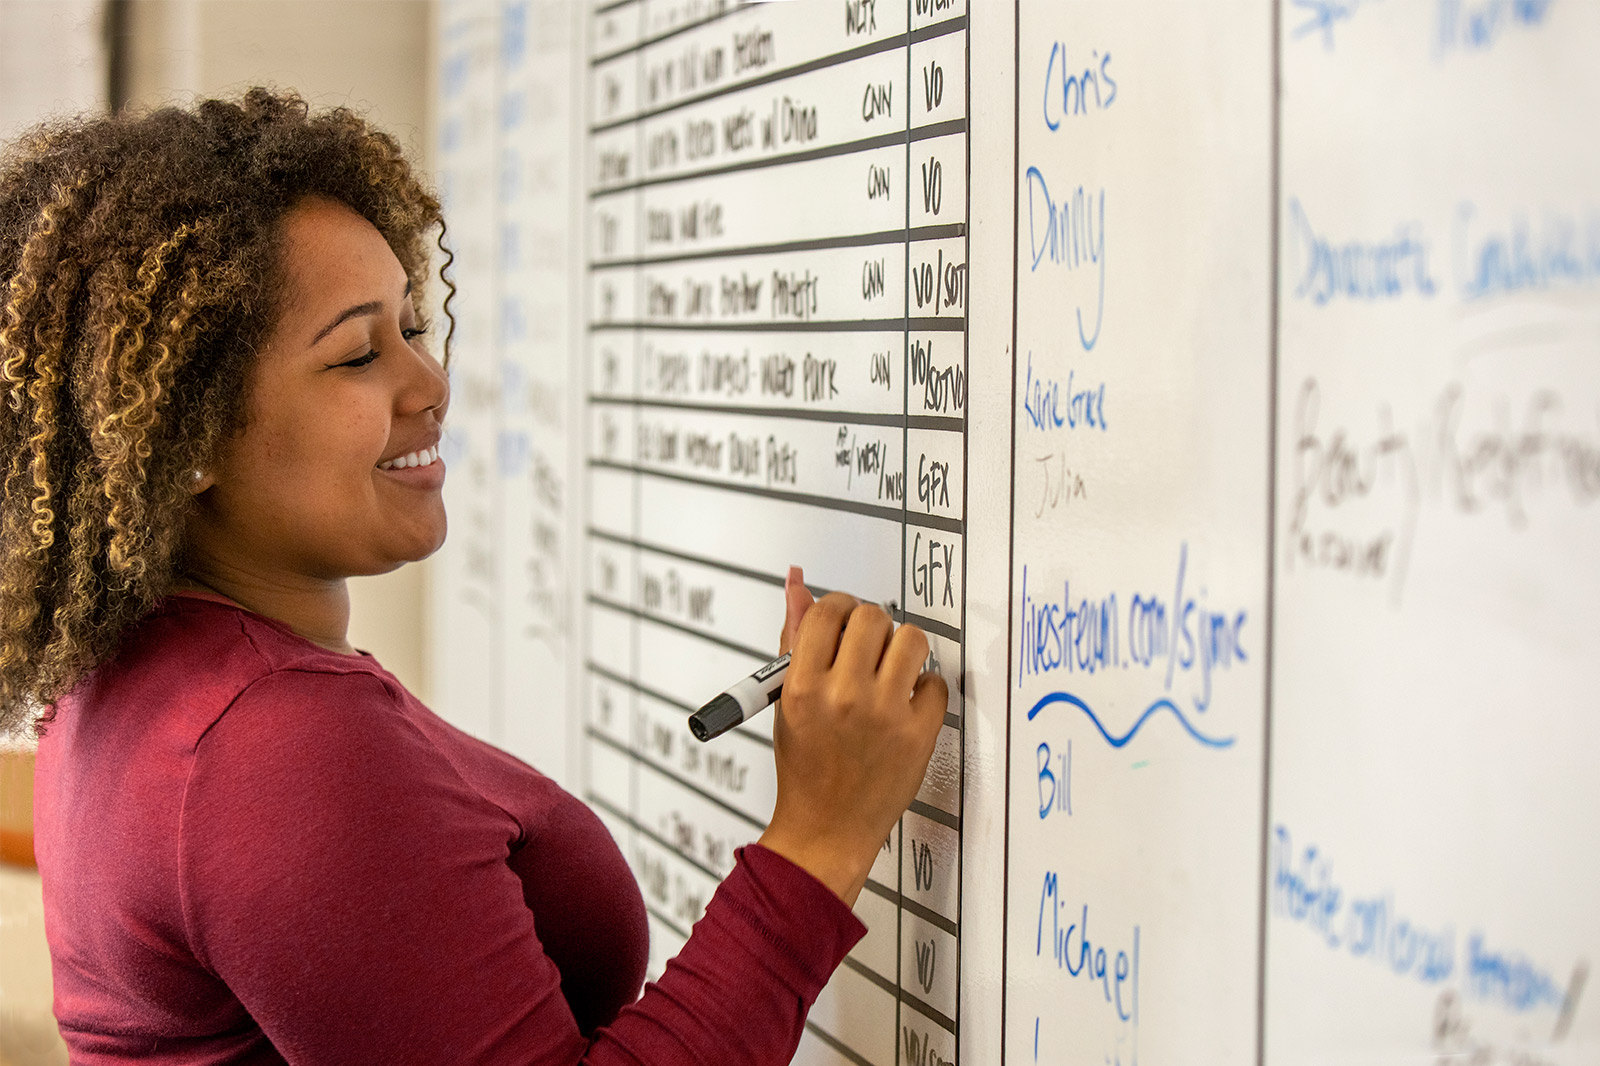 A journalism student smiles while filling in the day's television news production schedule on a dry erase board.